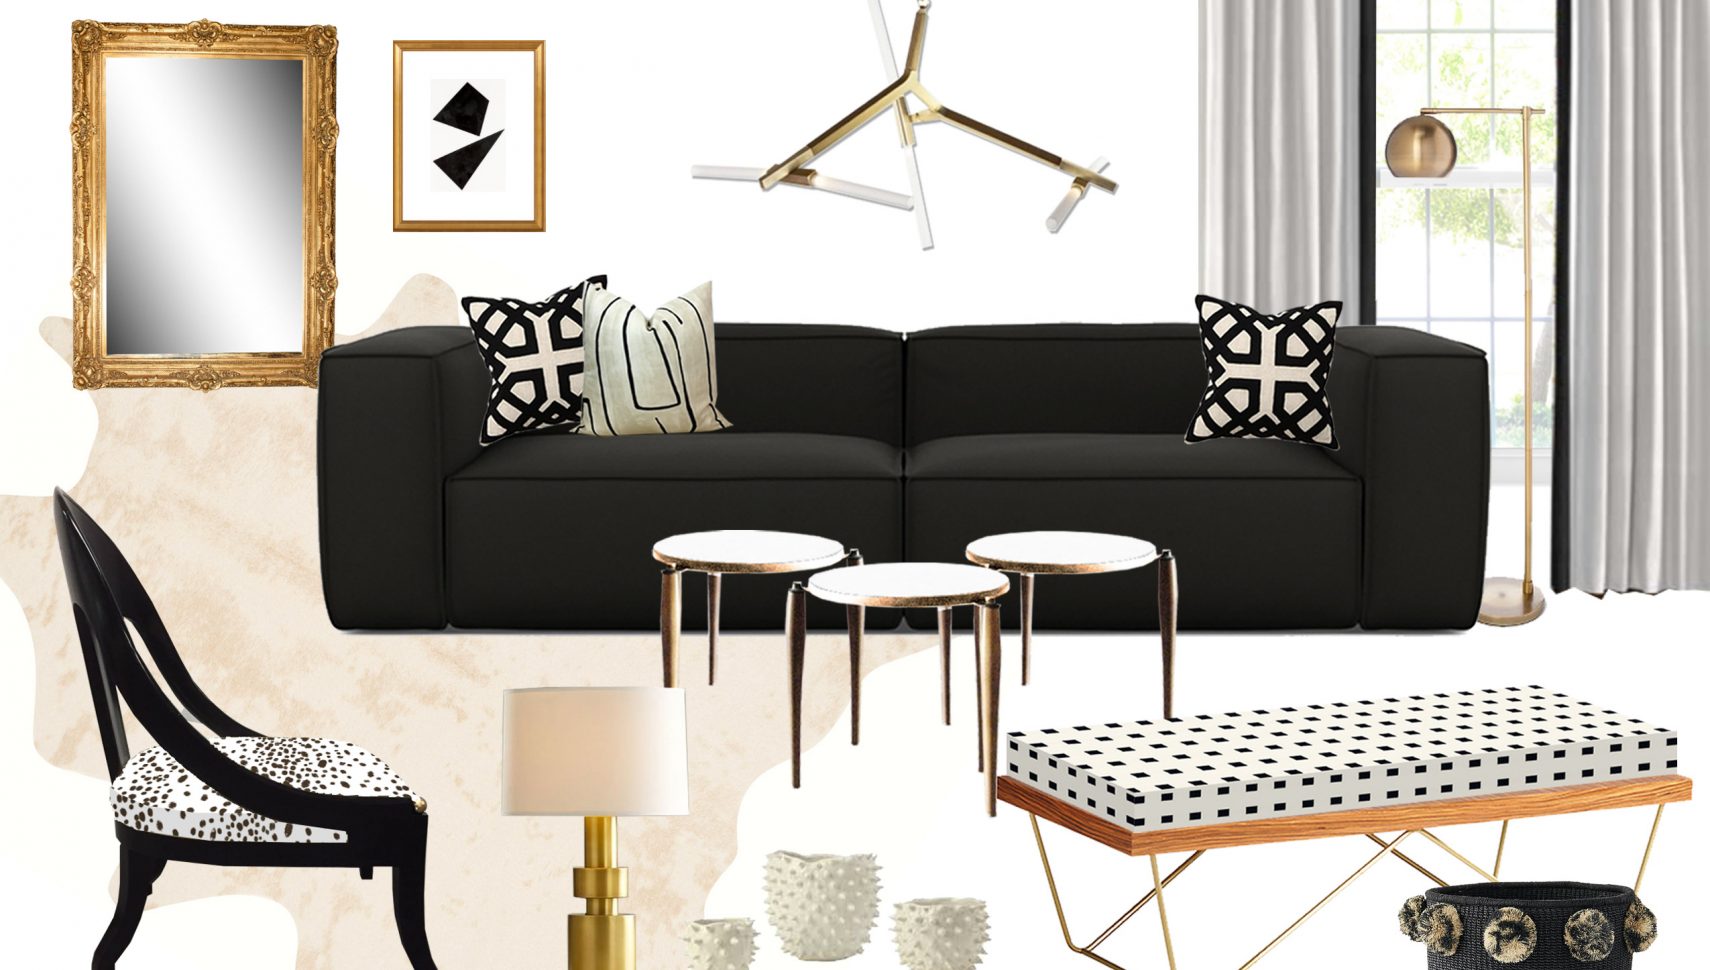 The Black and White Abode, Part 2: The Concepts! | Havenly's Blog!